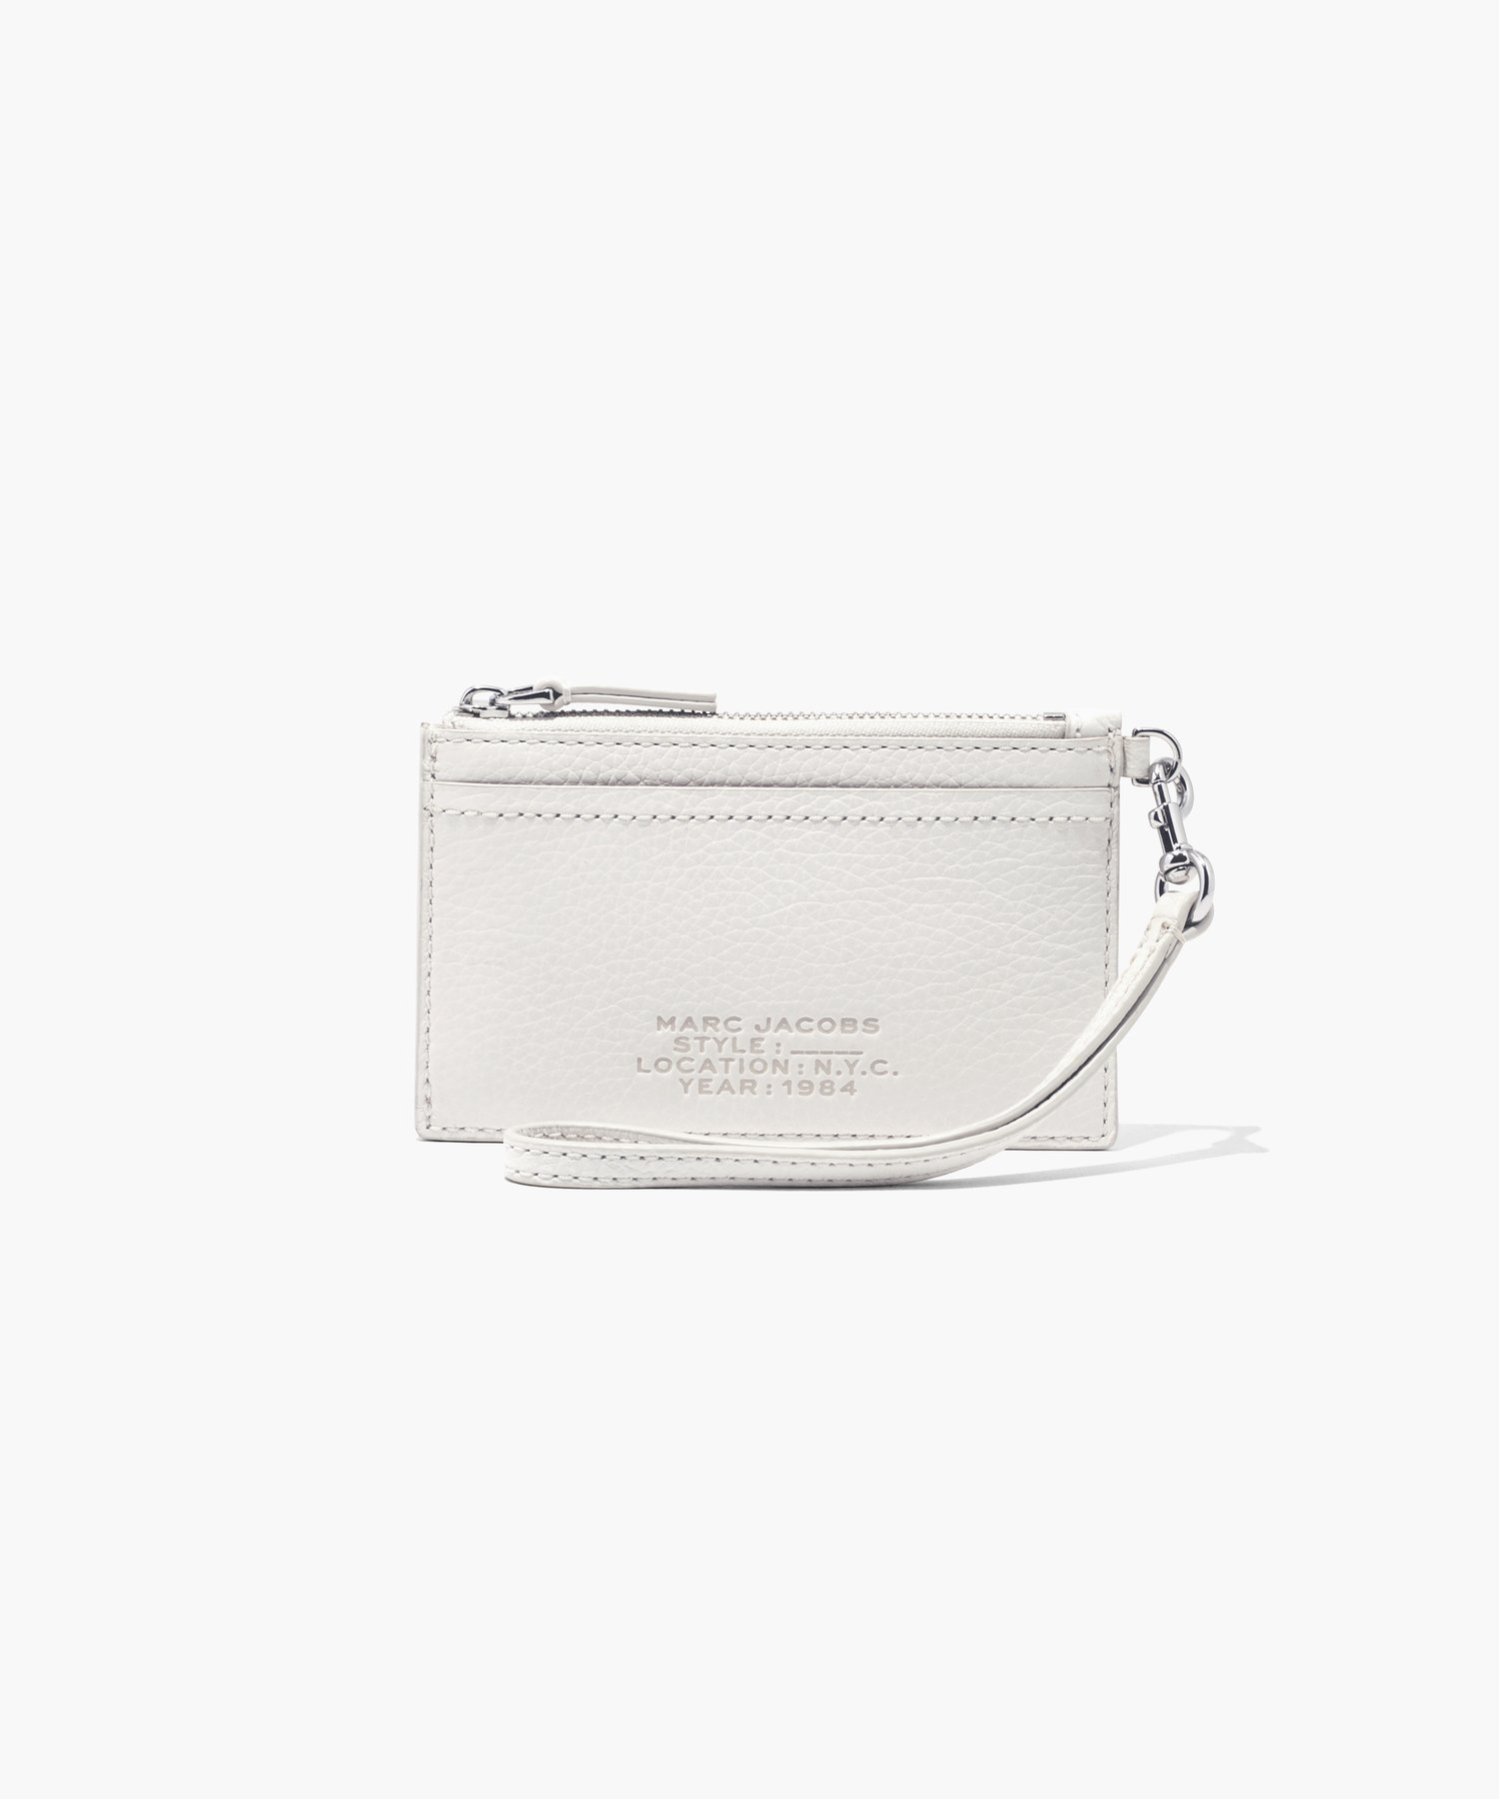 MARC JACOBS 【公式】THE LEATHER TOP ZIP WRISTLET WALLET/ザ レザー トップ ジップ リストレット ウォレット マーク ジェイコブス 財布・ポーチ・ケース 財布 ホワイト【送料無料】